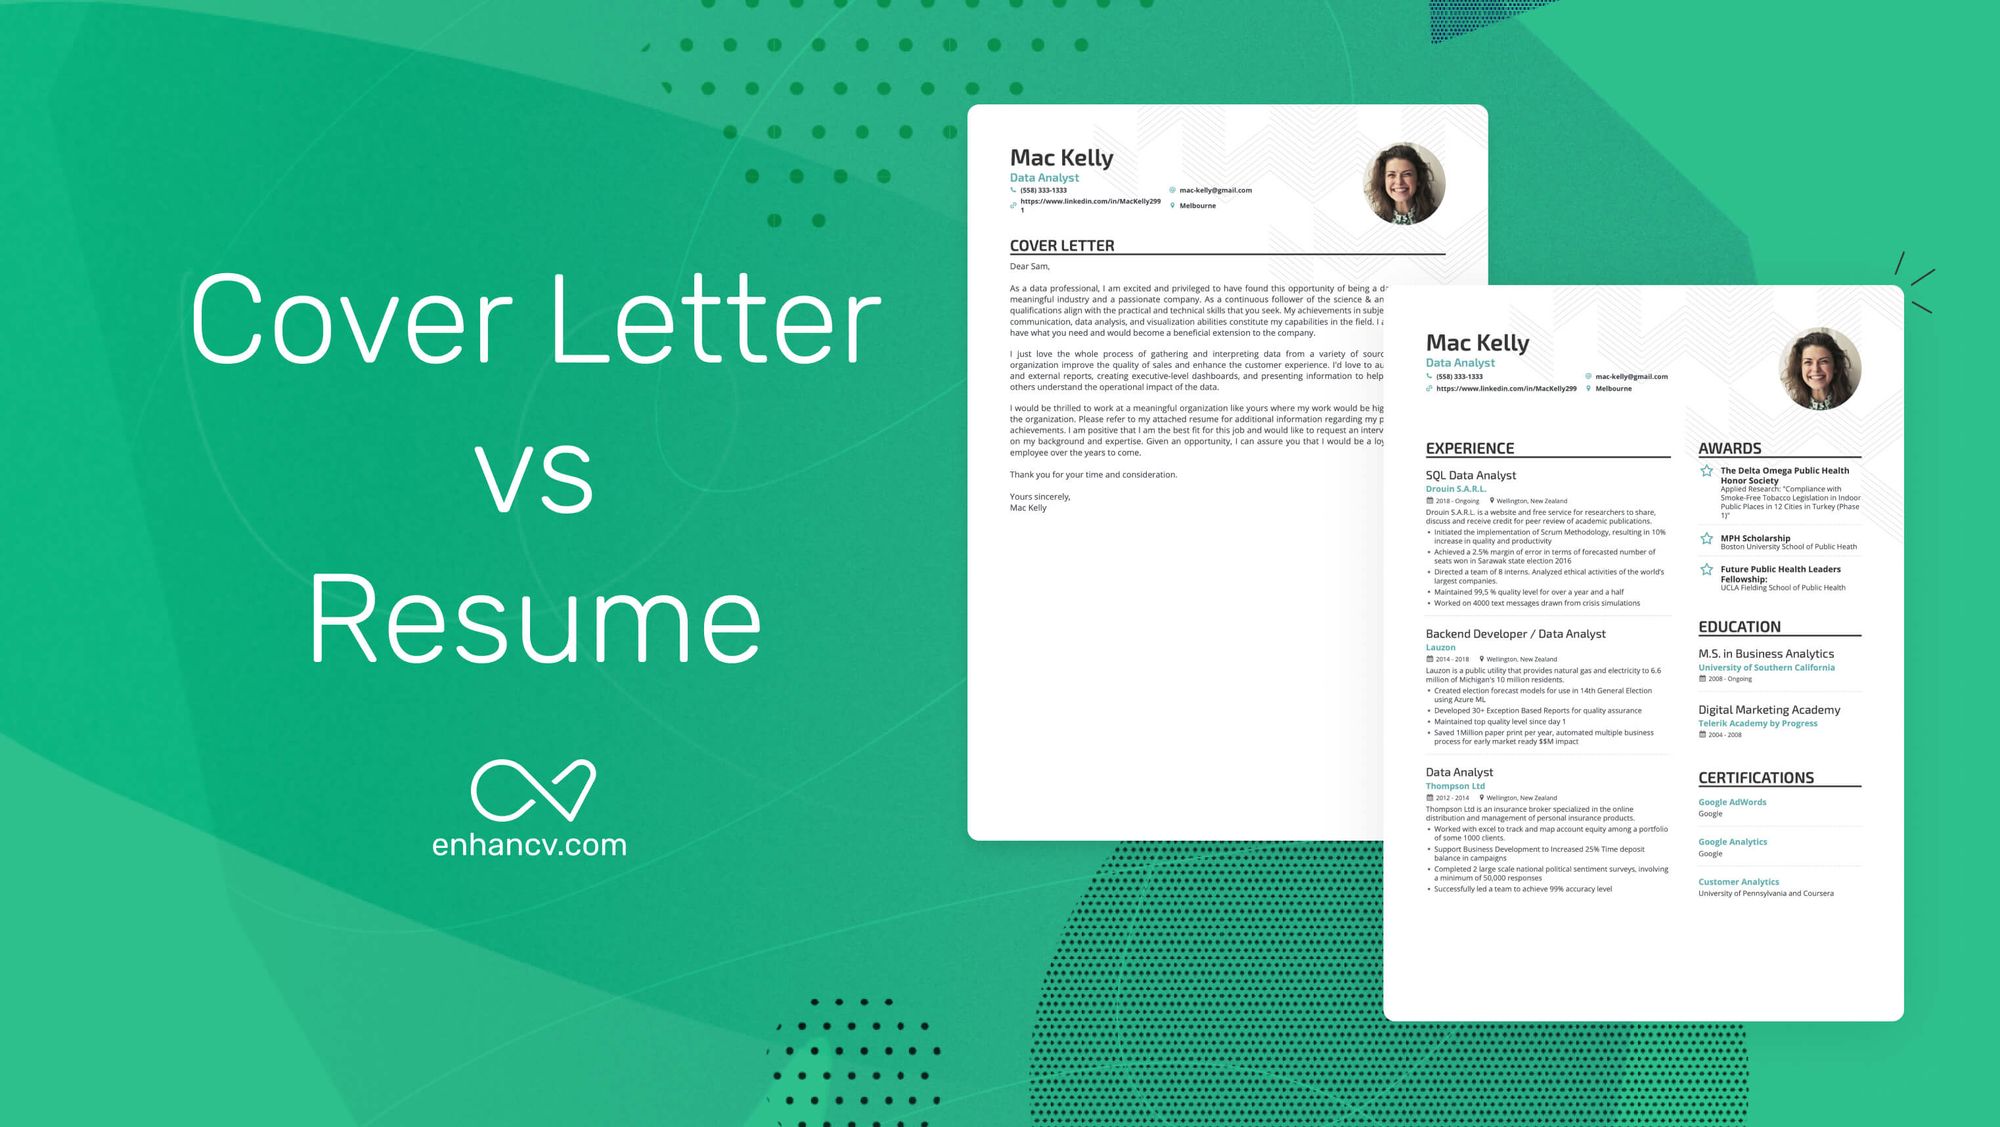 1. how does a cover letter complement your resume